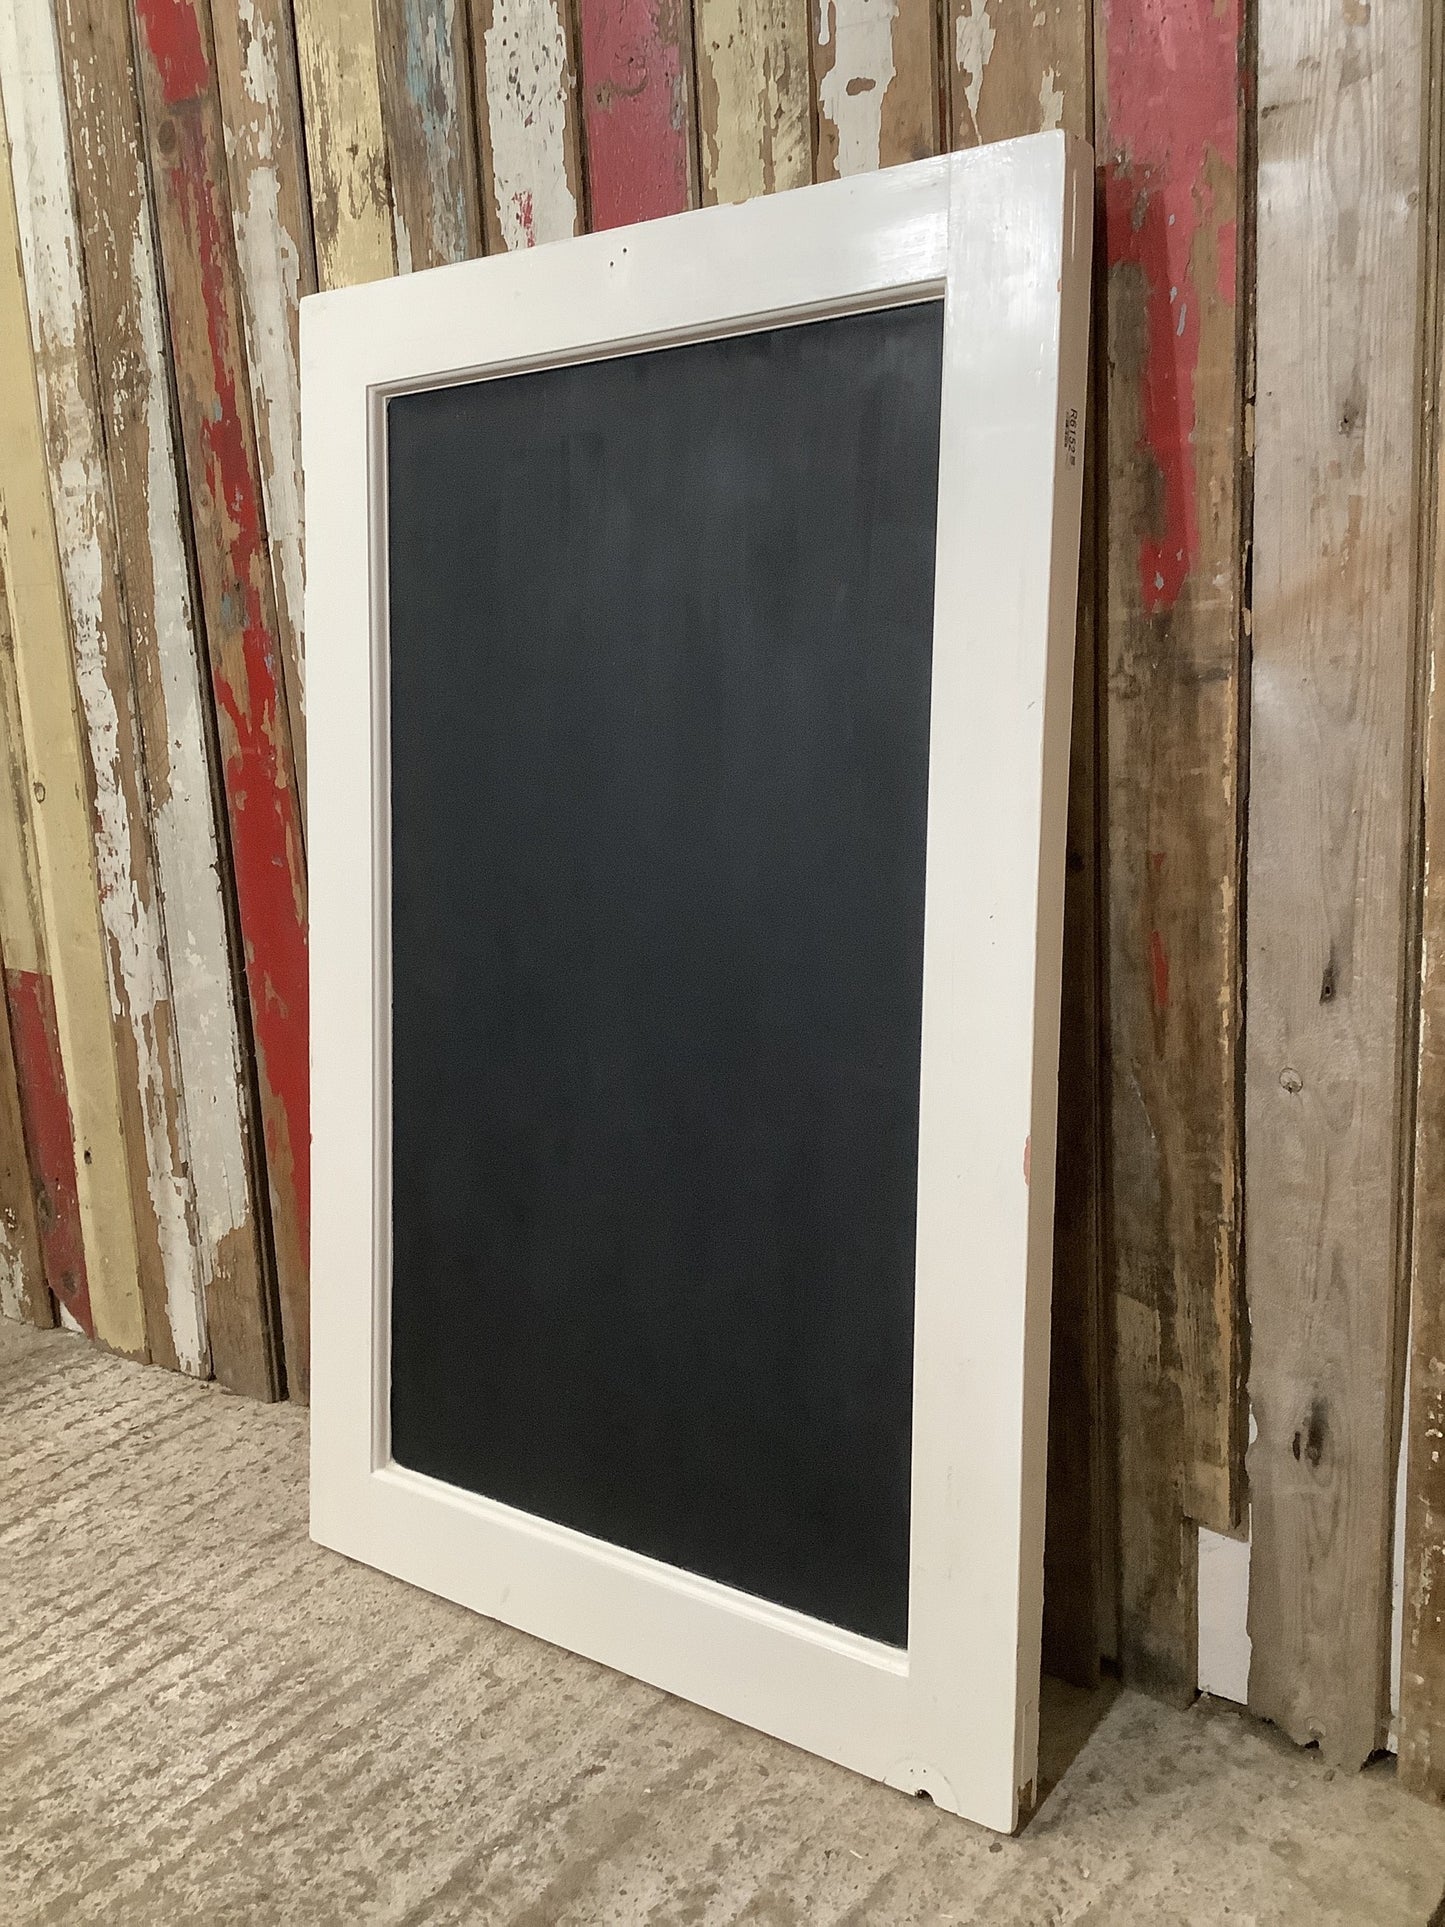 Repurposed White Painted Pine Double sided Blackboard Noticeboard 3'9"H 2'5" W